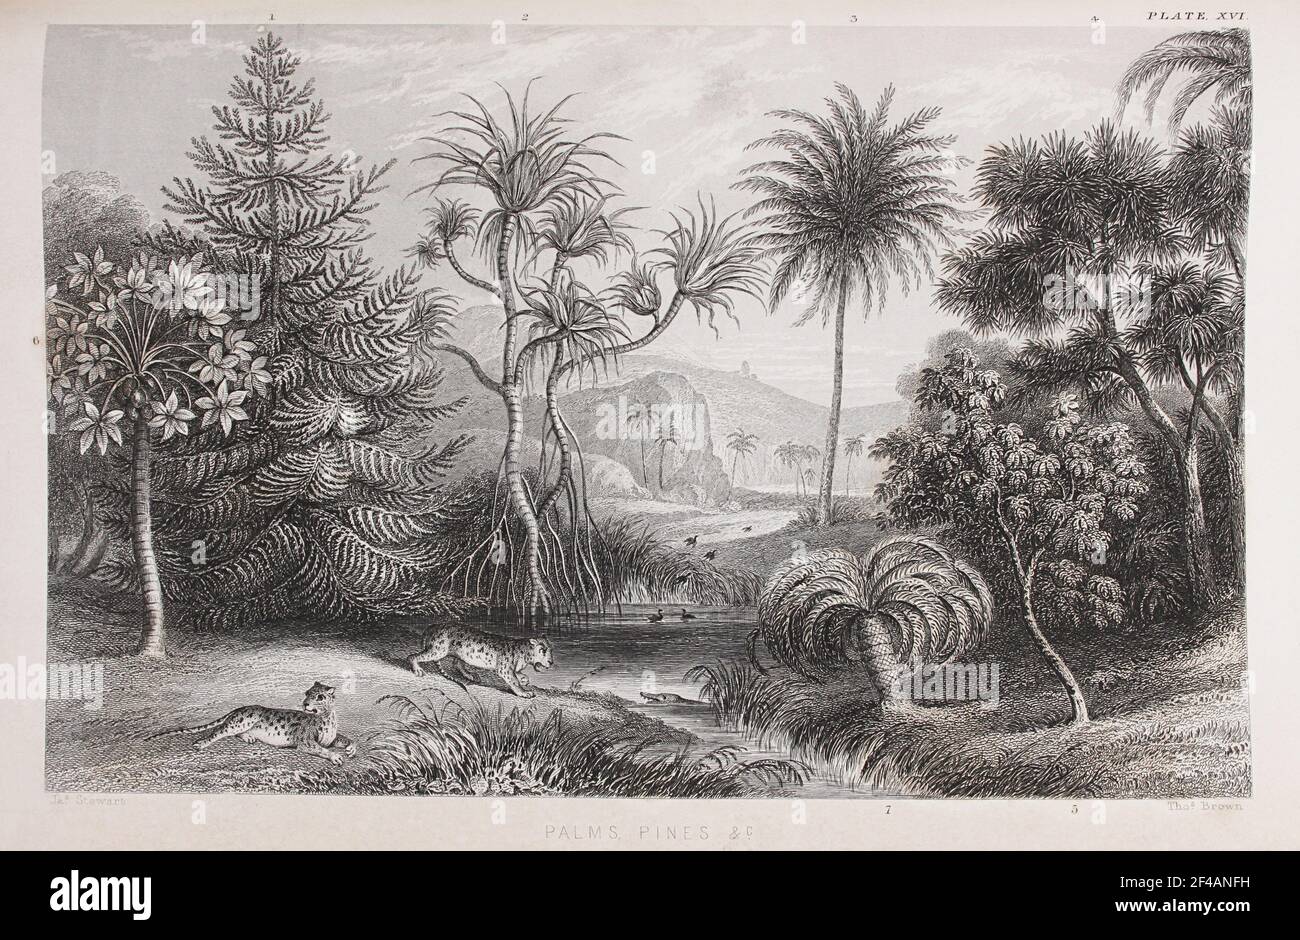 Plate titled 'Palms, Pines etc.', from William Rhind's 'The Vegetable Kingdom', 1860 Stock Photo